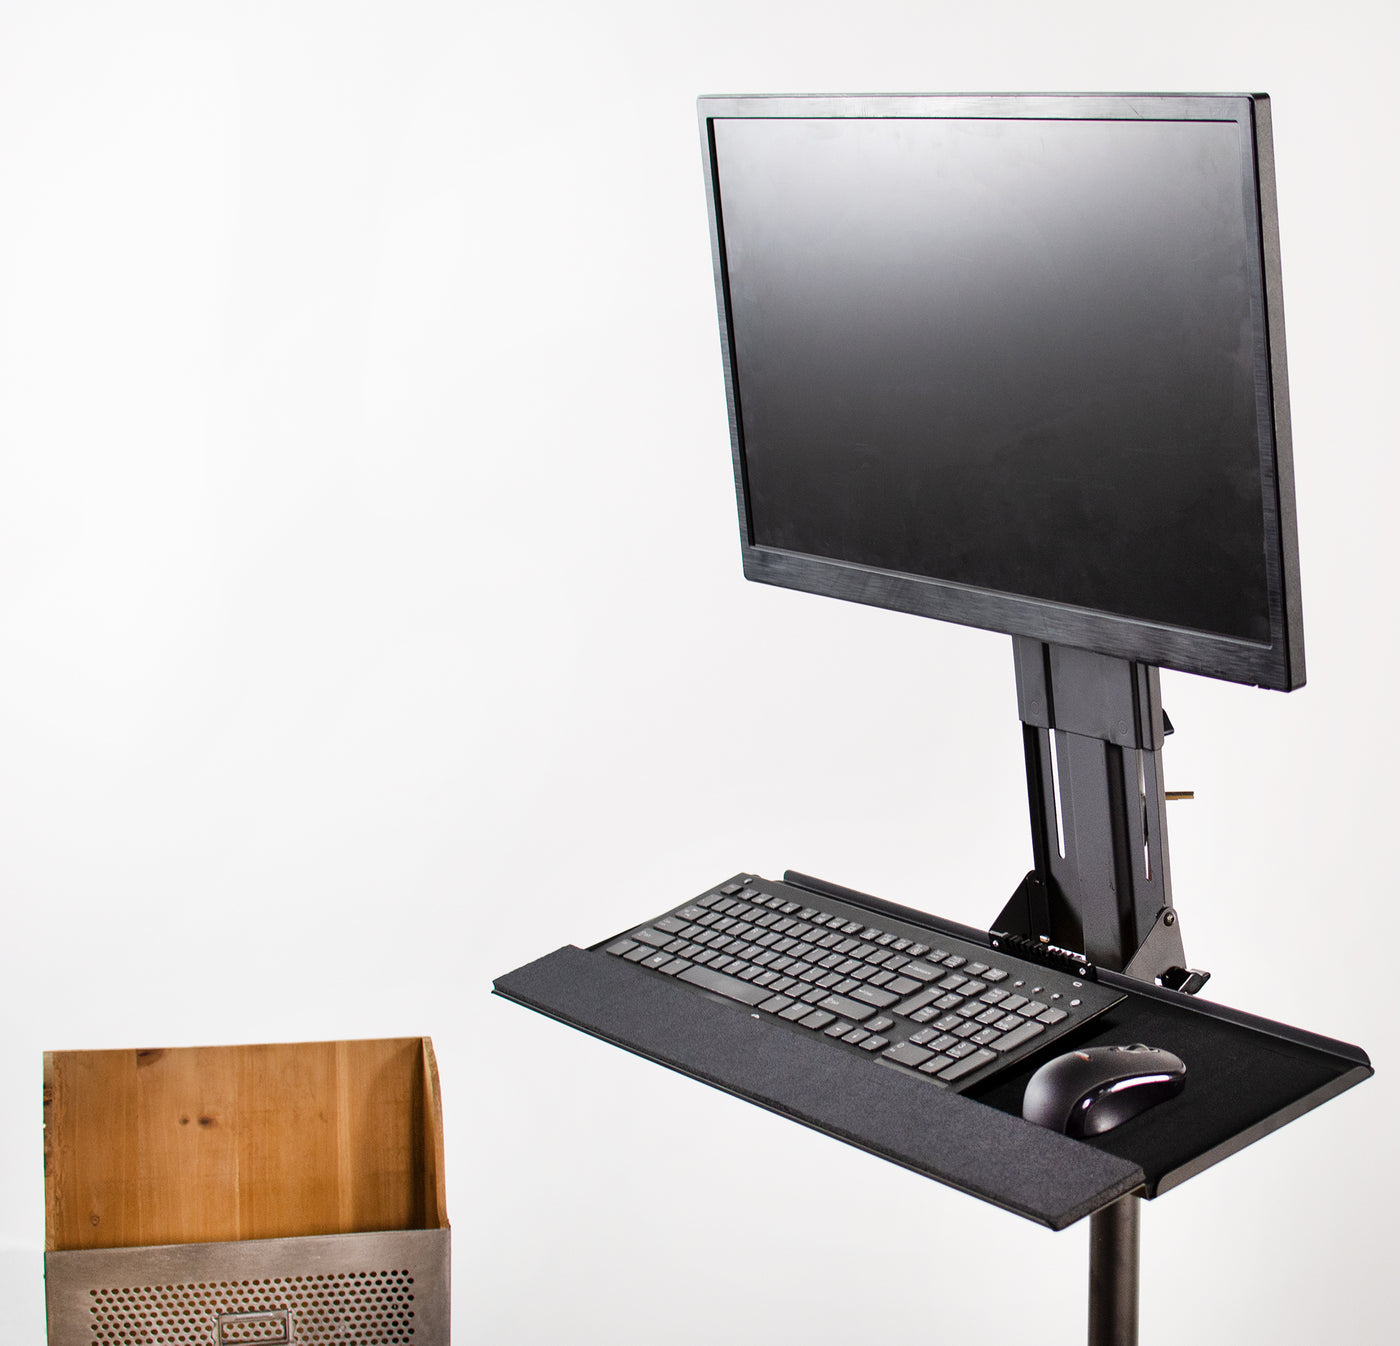  Extra tall yet sturdy monitor mount with an attached keyboard tray from VIVO.